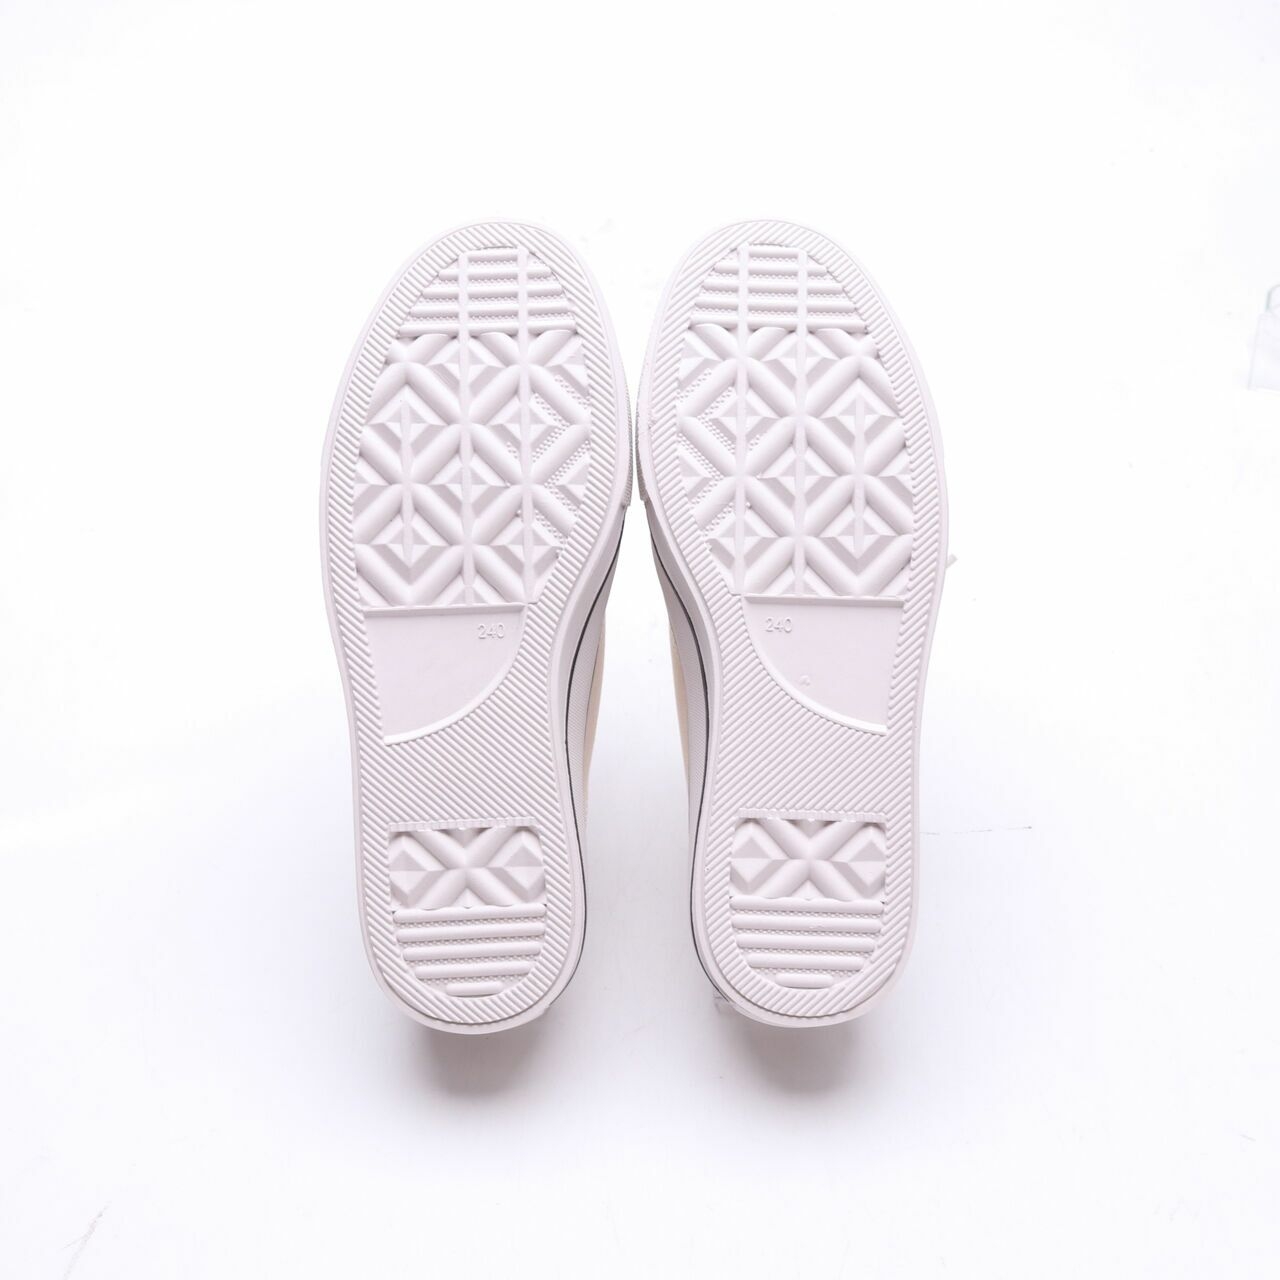 Mandy's Off White Sneakers